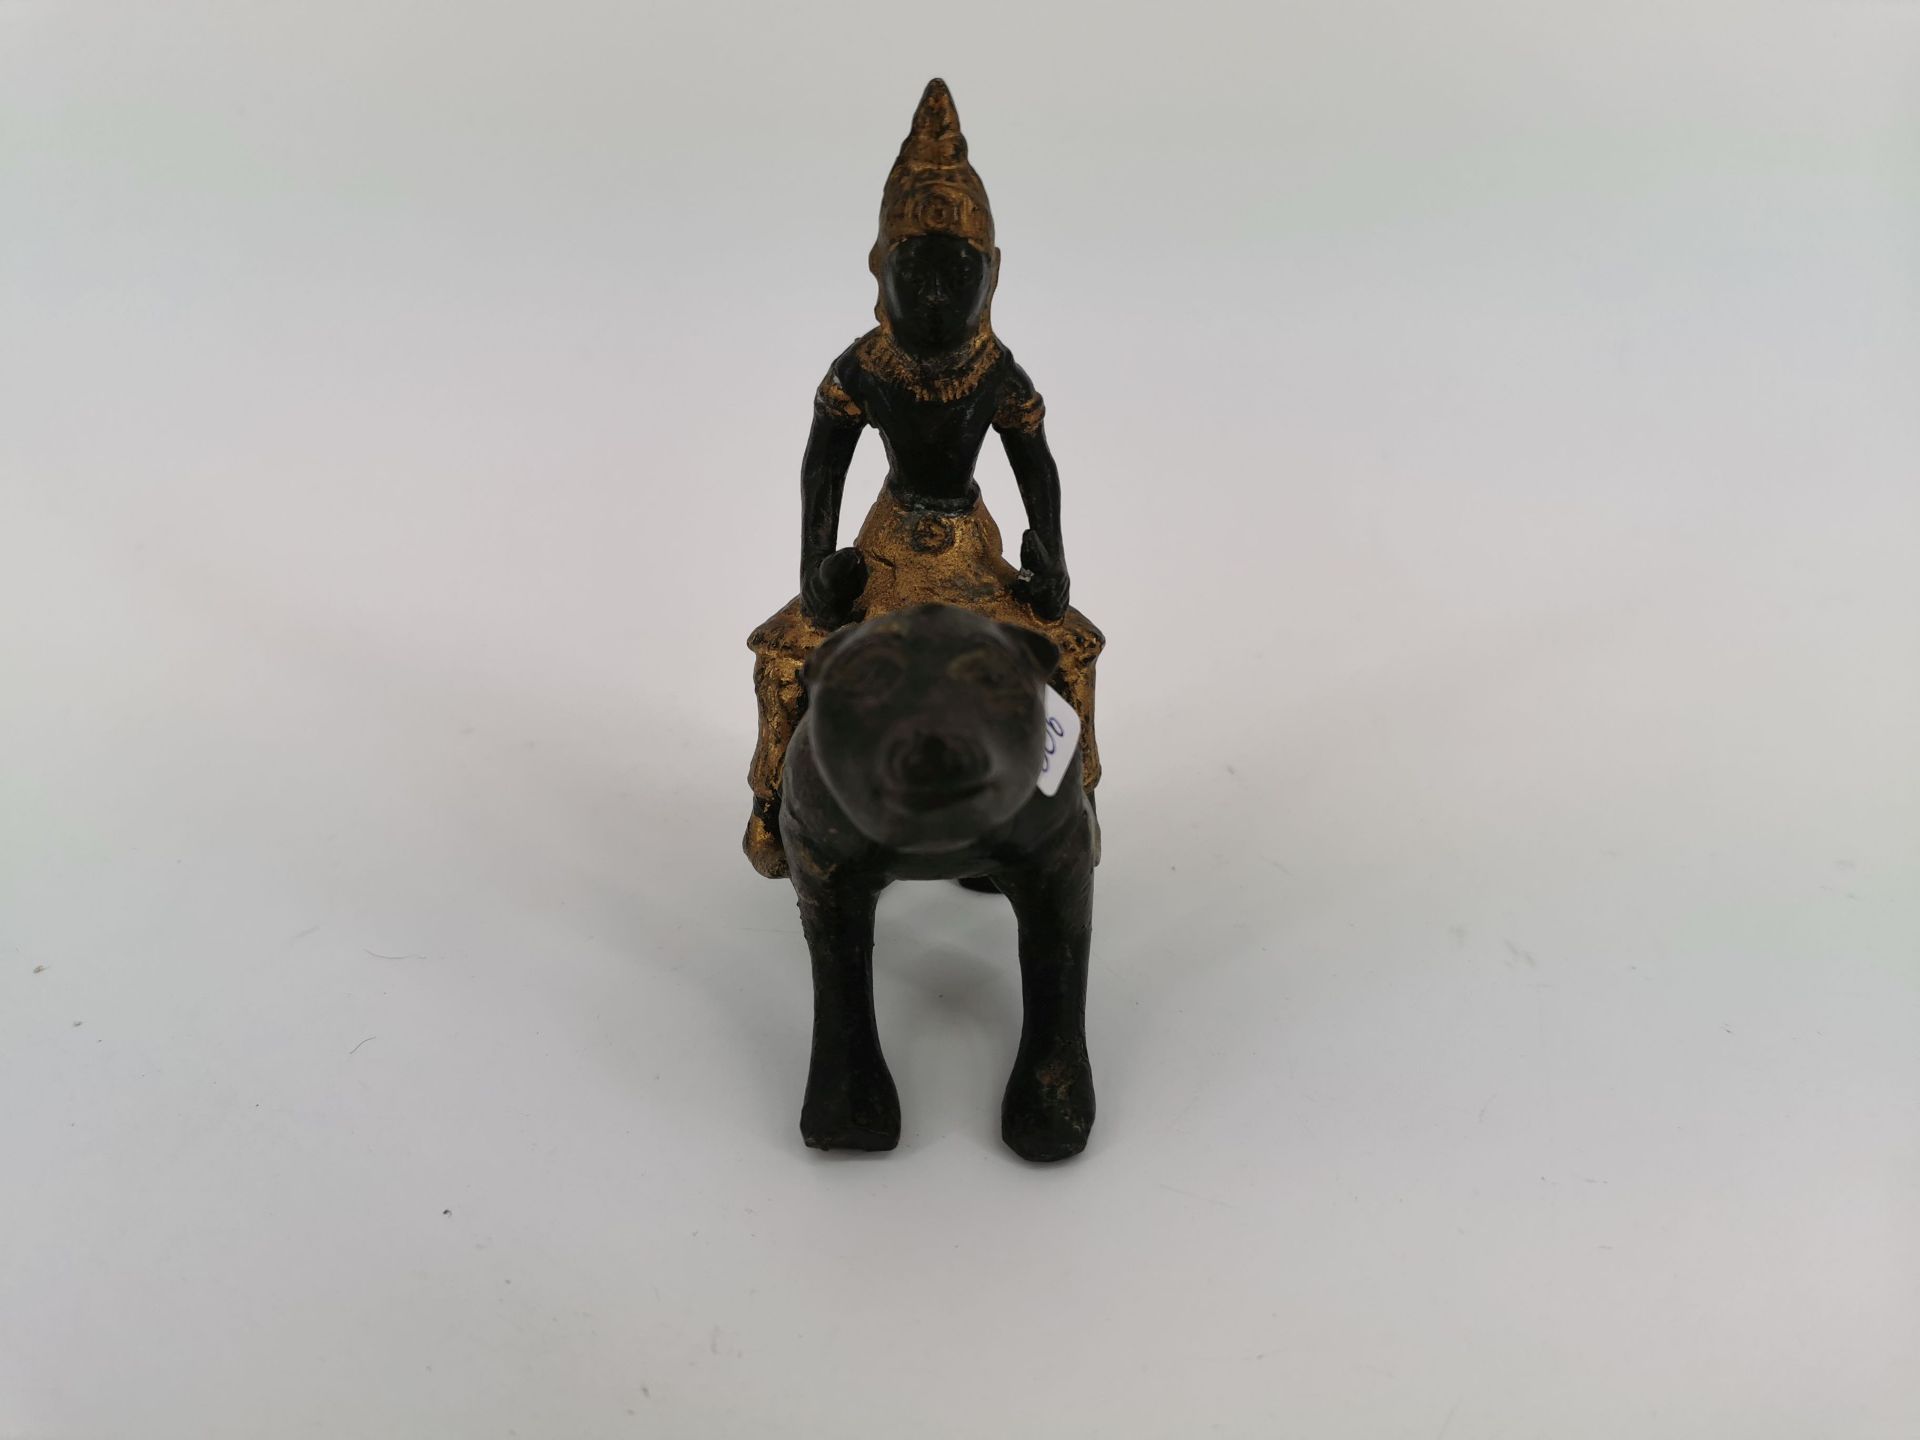 FIGURE / BRONZE SCULPTURE: Man riding a monkey, Thailand, bronze, partially painted in gold colour - Image 2 of 4